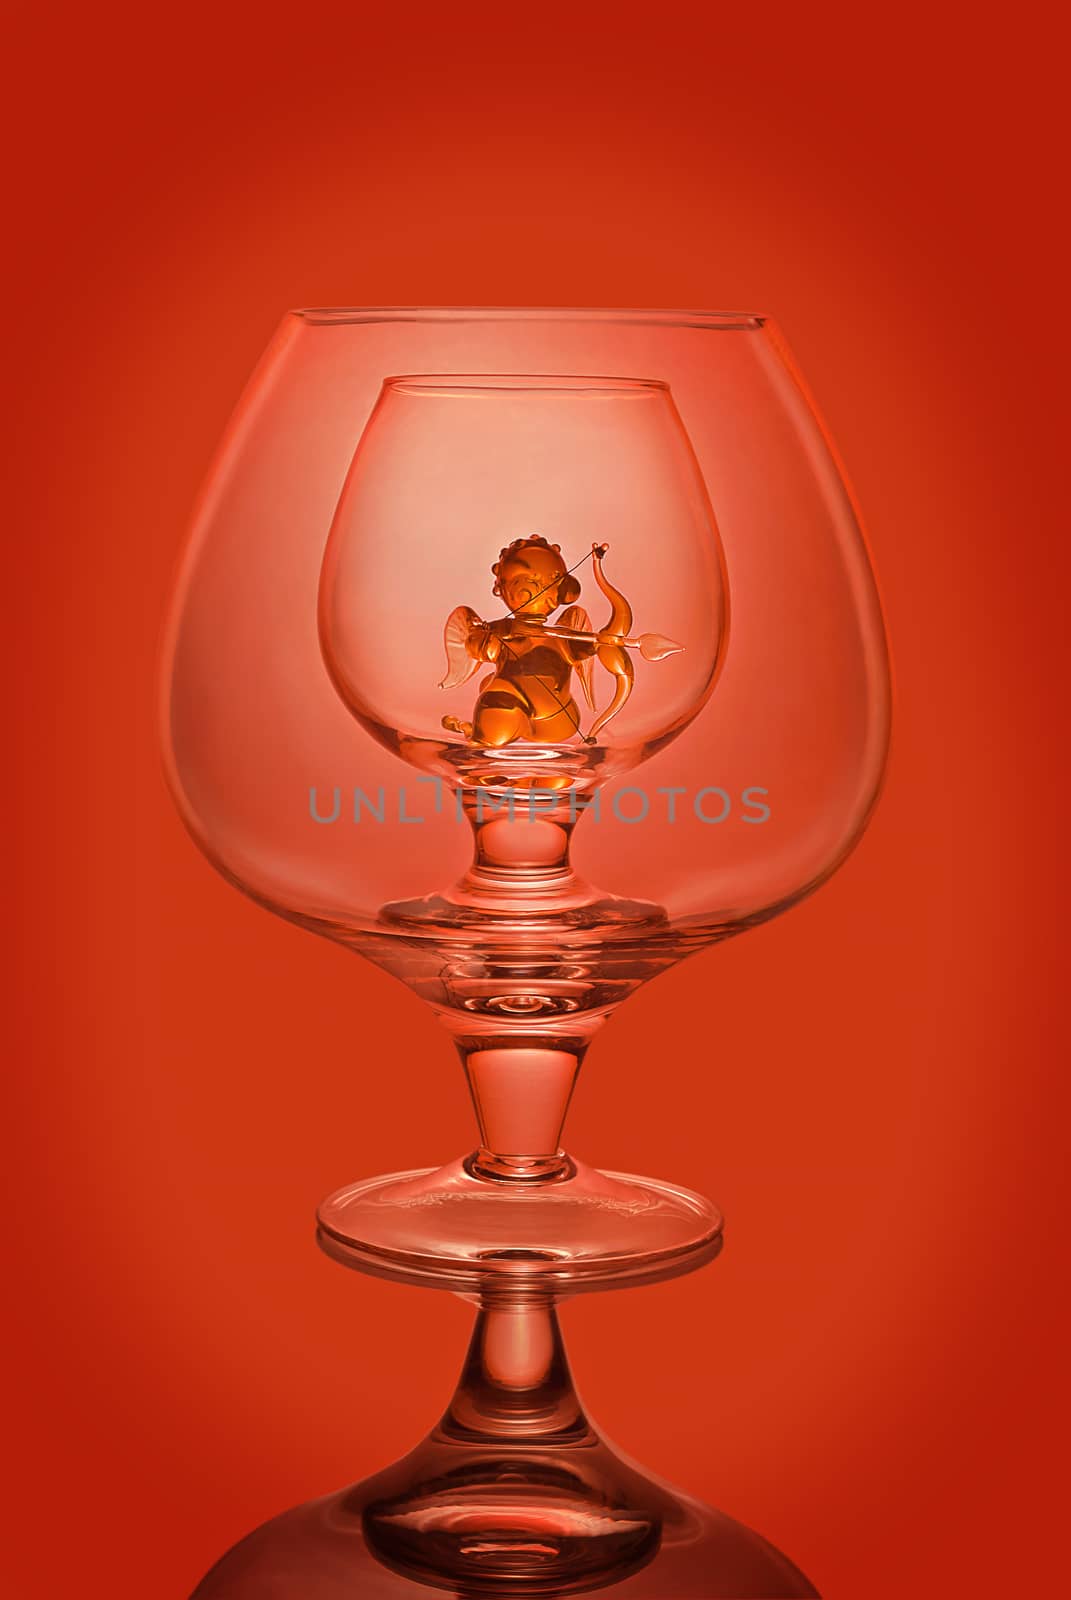 Empty wine glasses on a red background, a glass statuette of an angel inside.